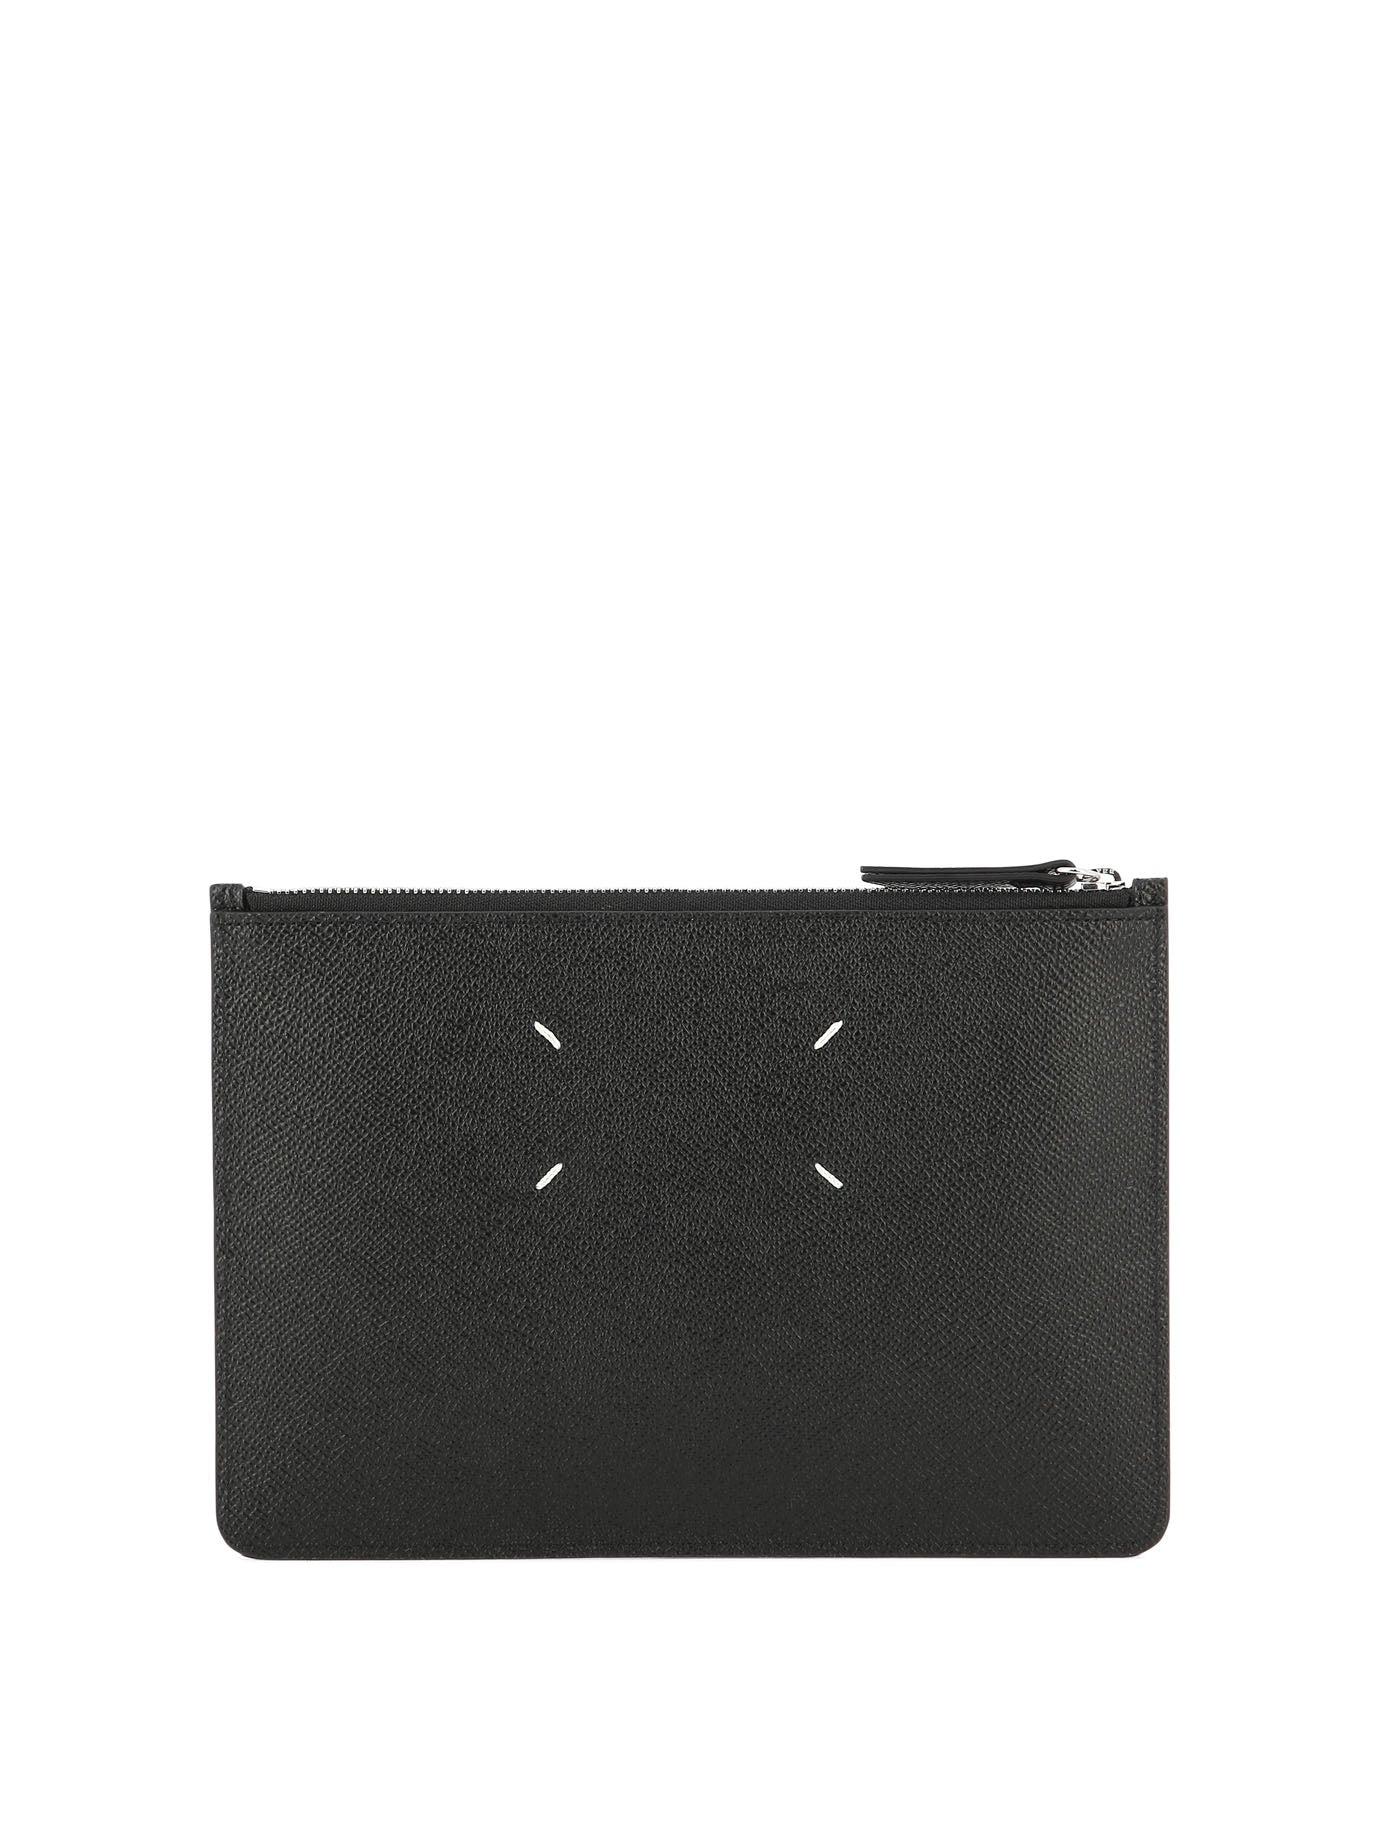 Four Stitch Leather Phone Pouch in Black - Maison Margiela